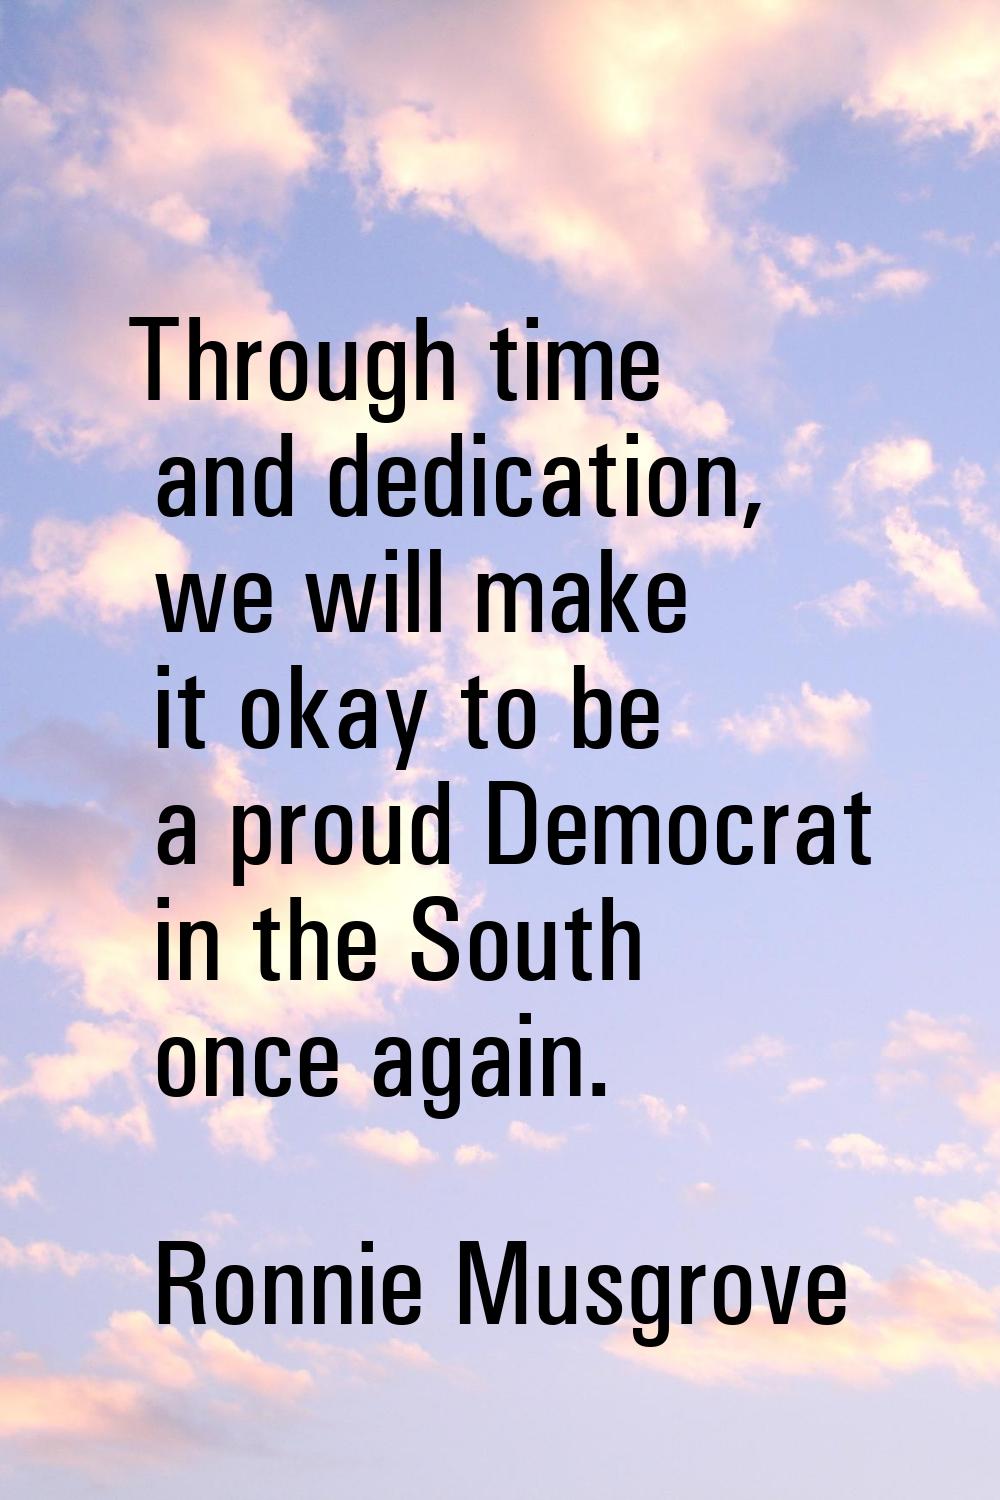 Through time and dedication, we will make it okay to be a proud Democrat in the South once again.